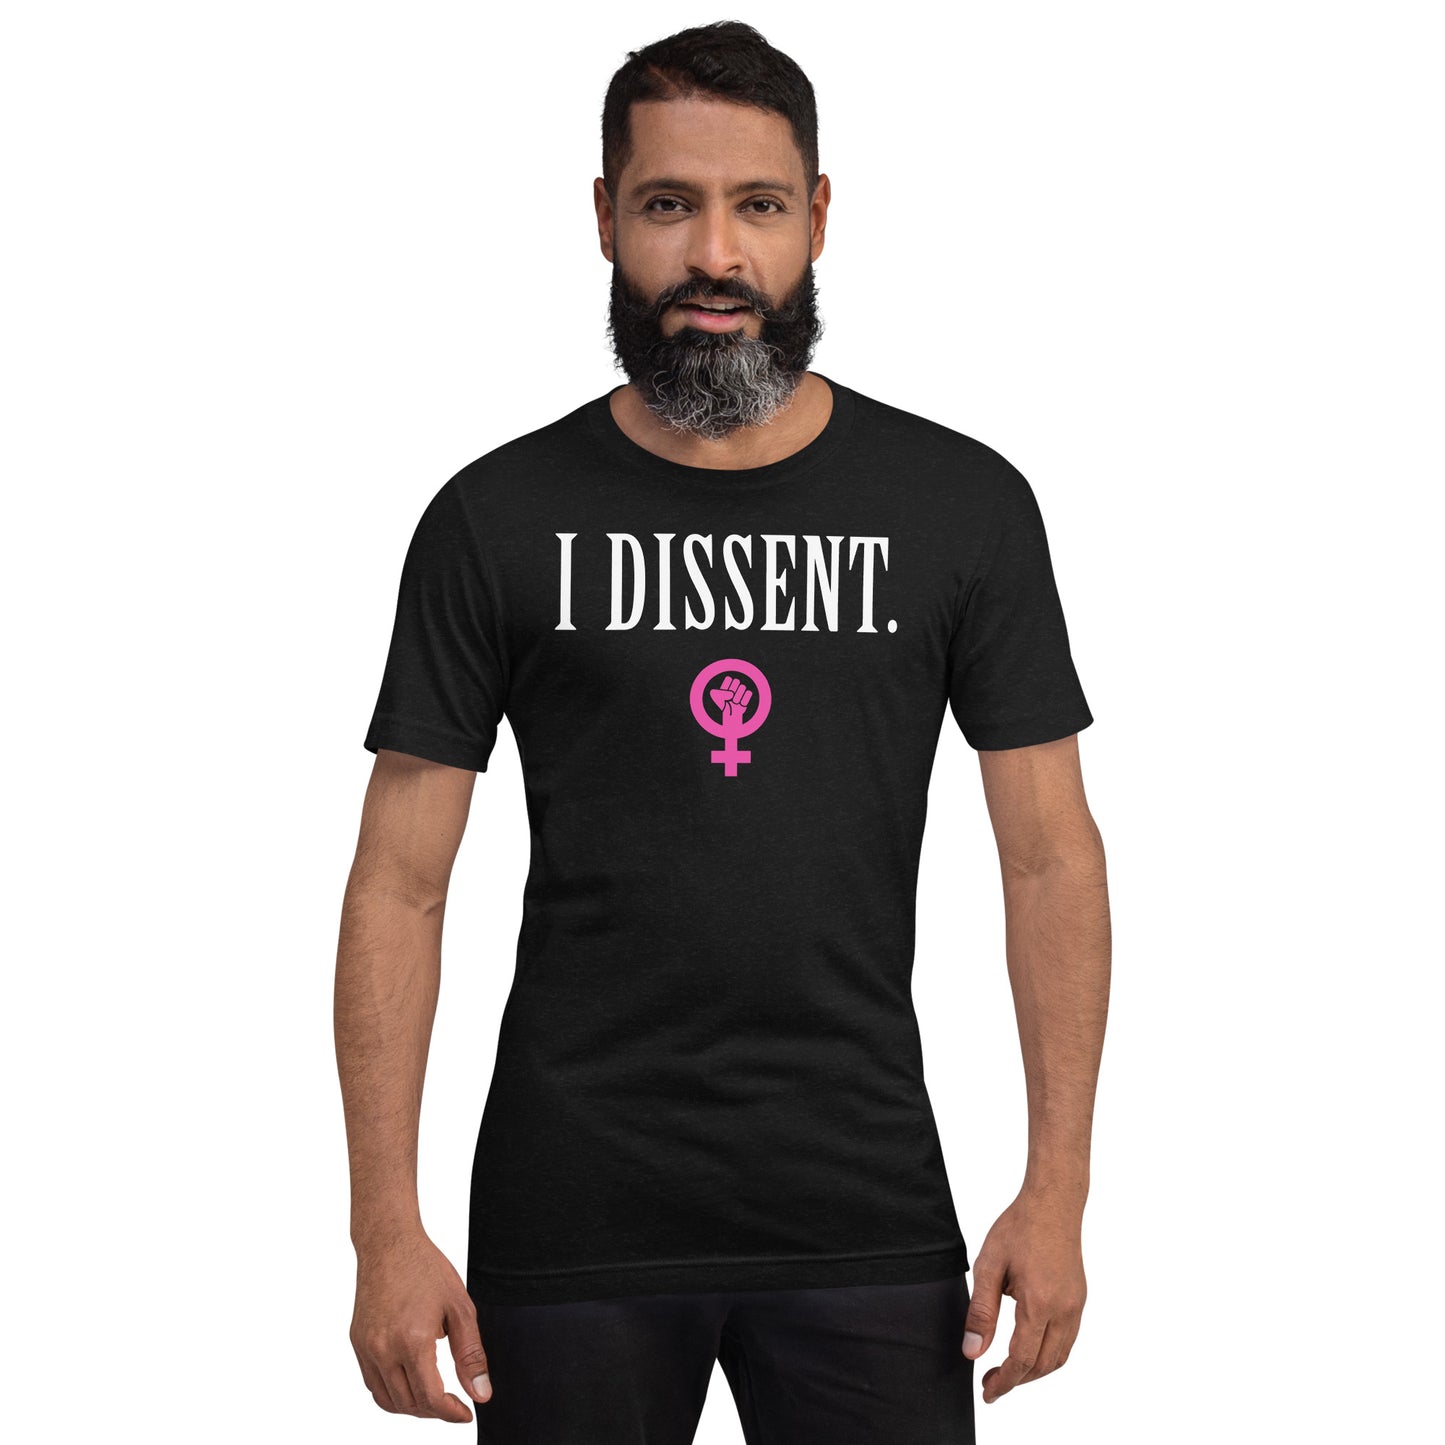 I DISSENT. Women's Rights Tee- Unisex Sizing